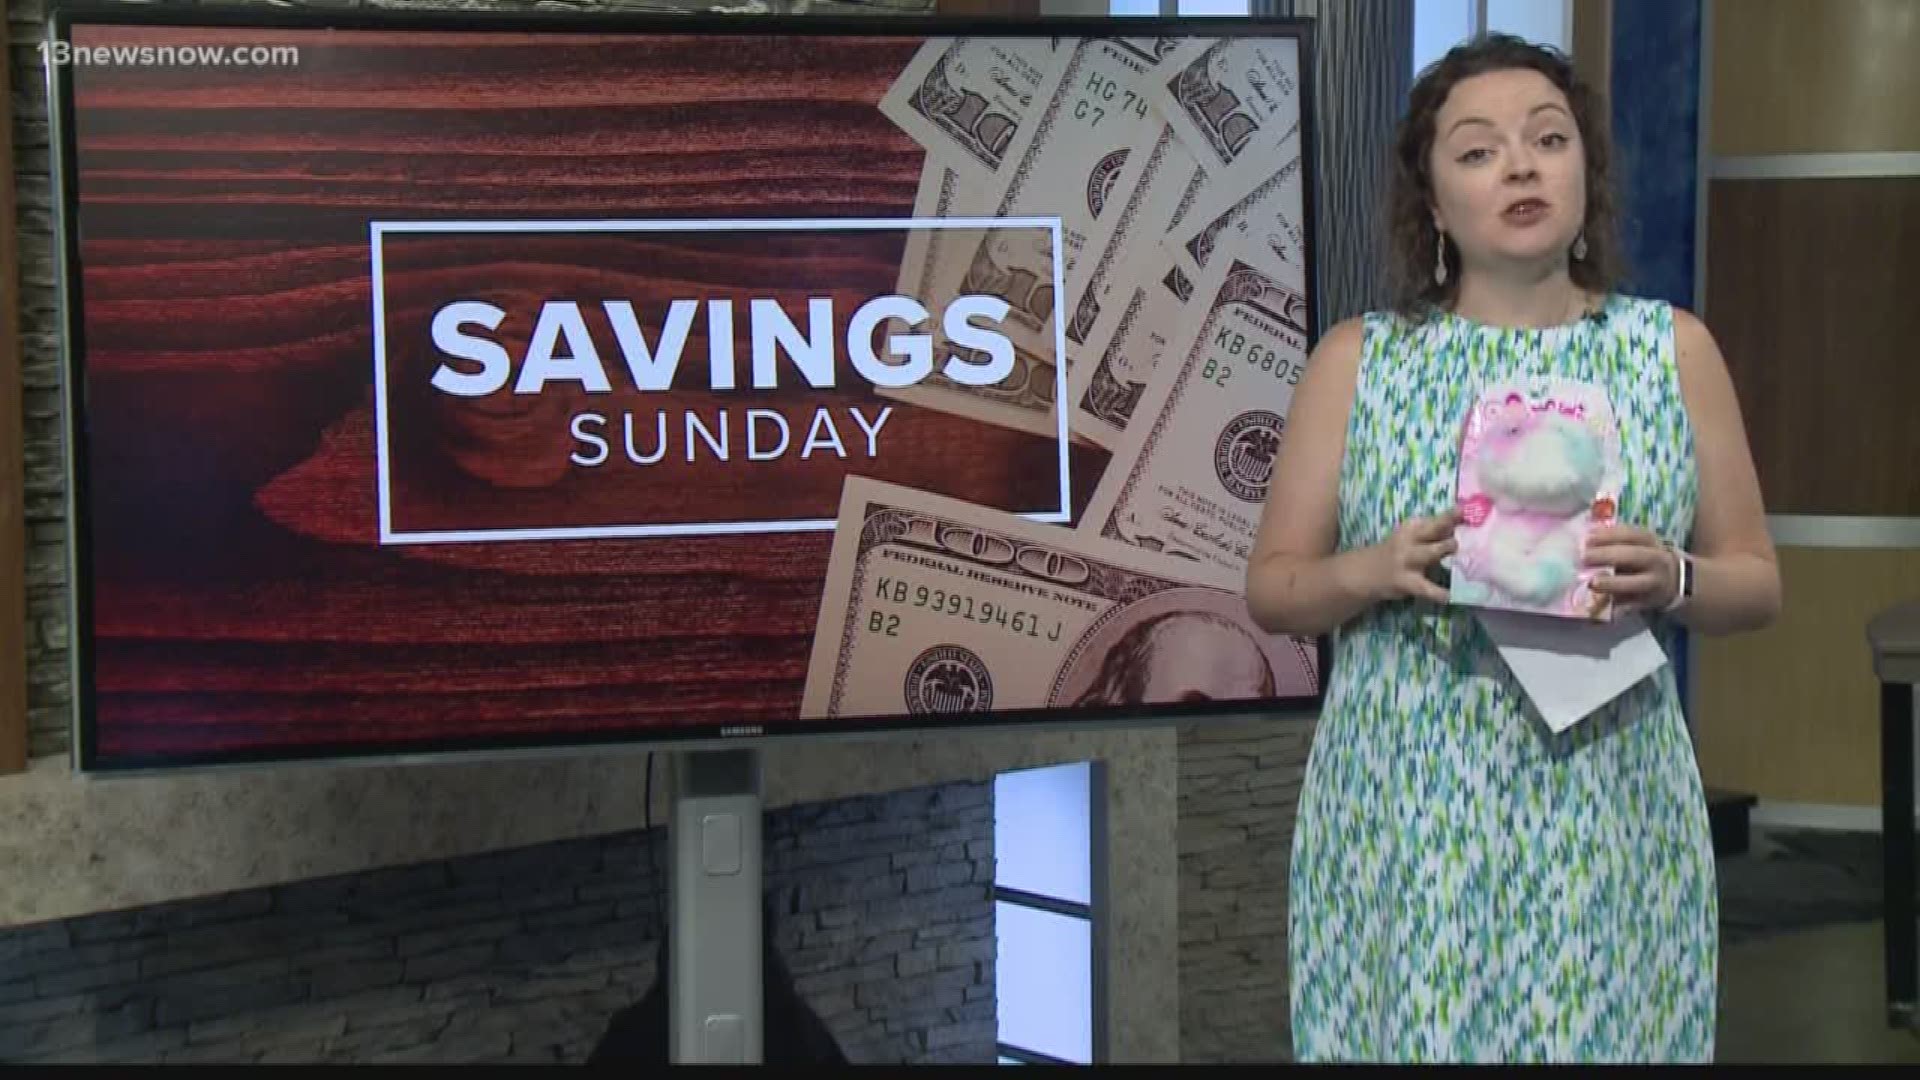 Laura Oliver from afrugralchick.com has your big savings for the week of Aug. 12, 2018.